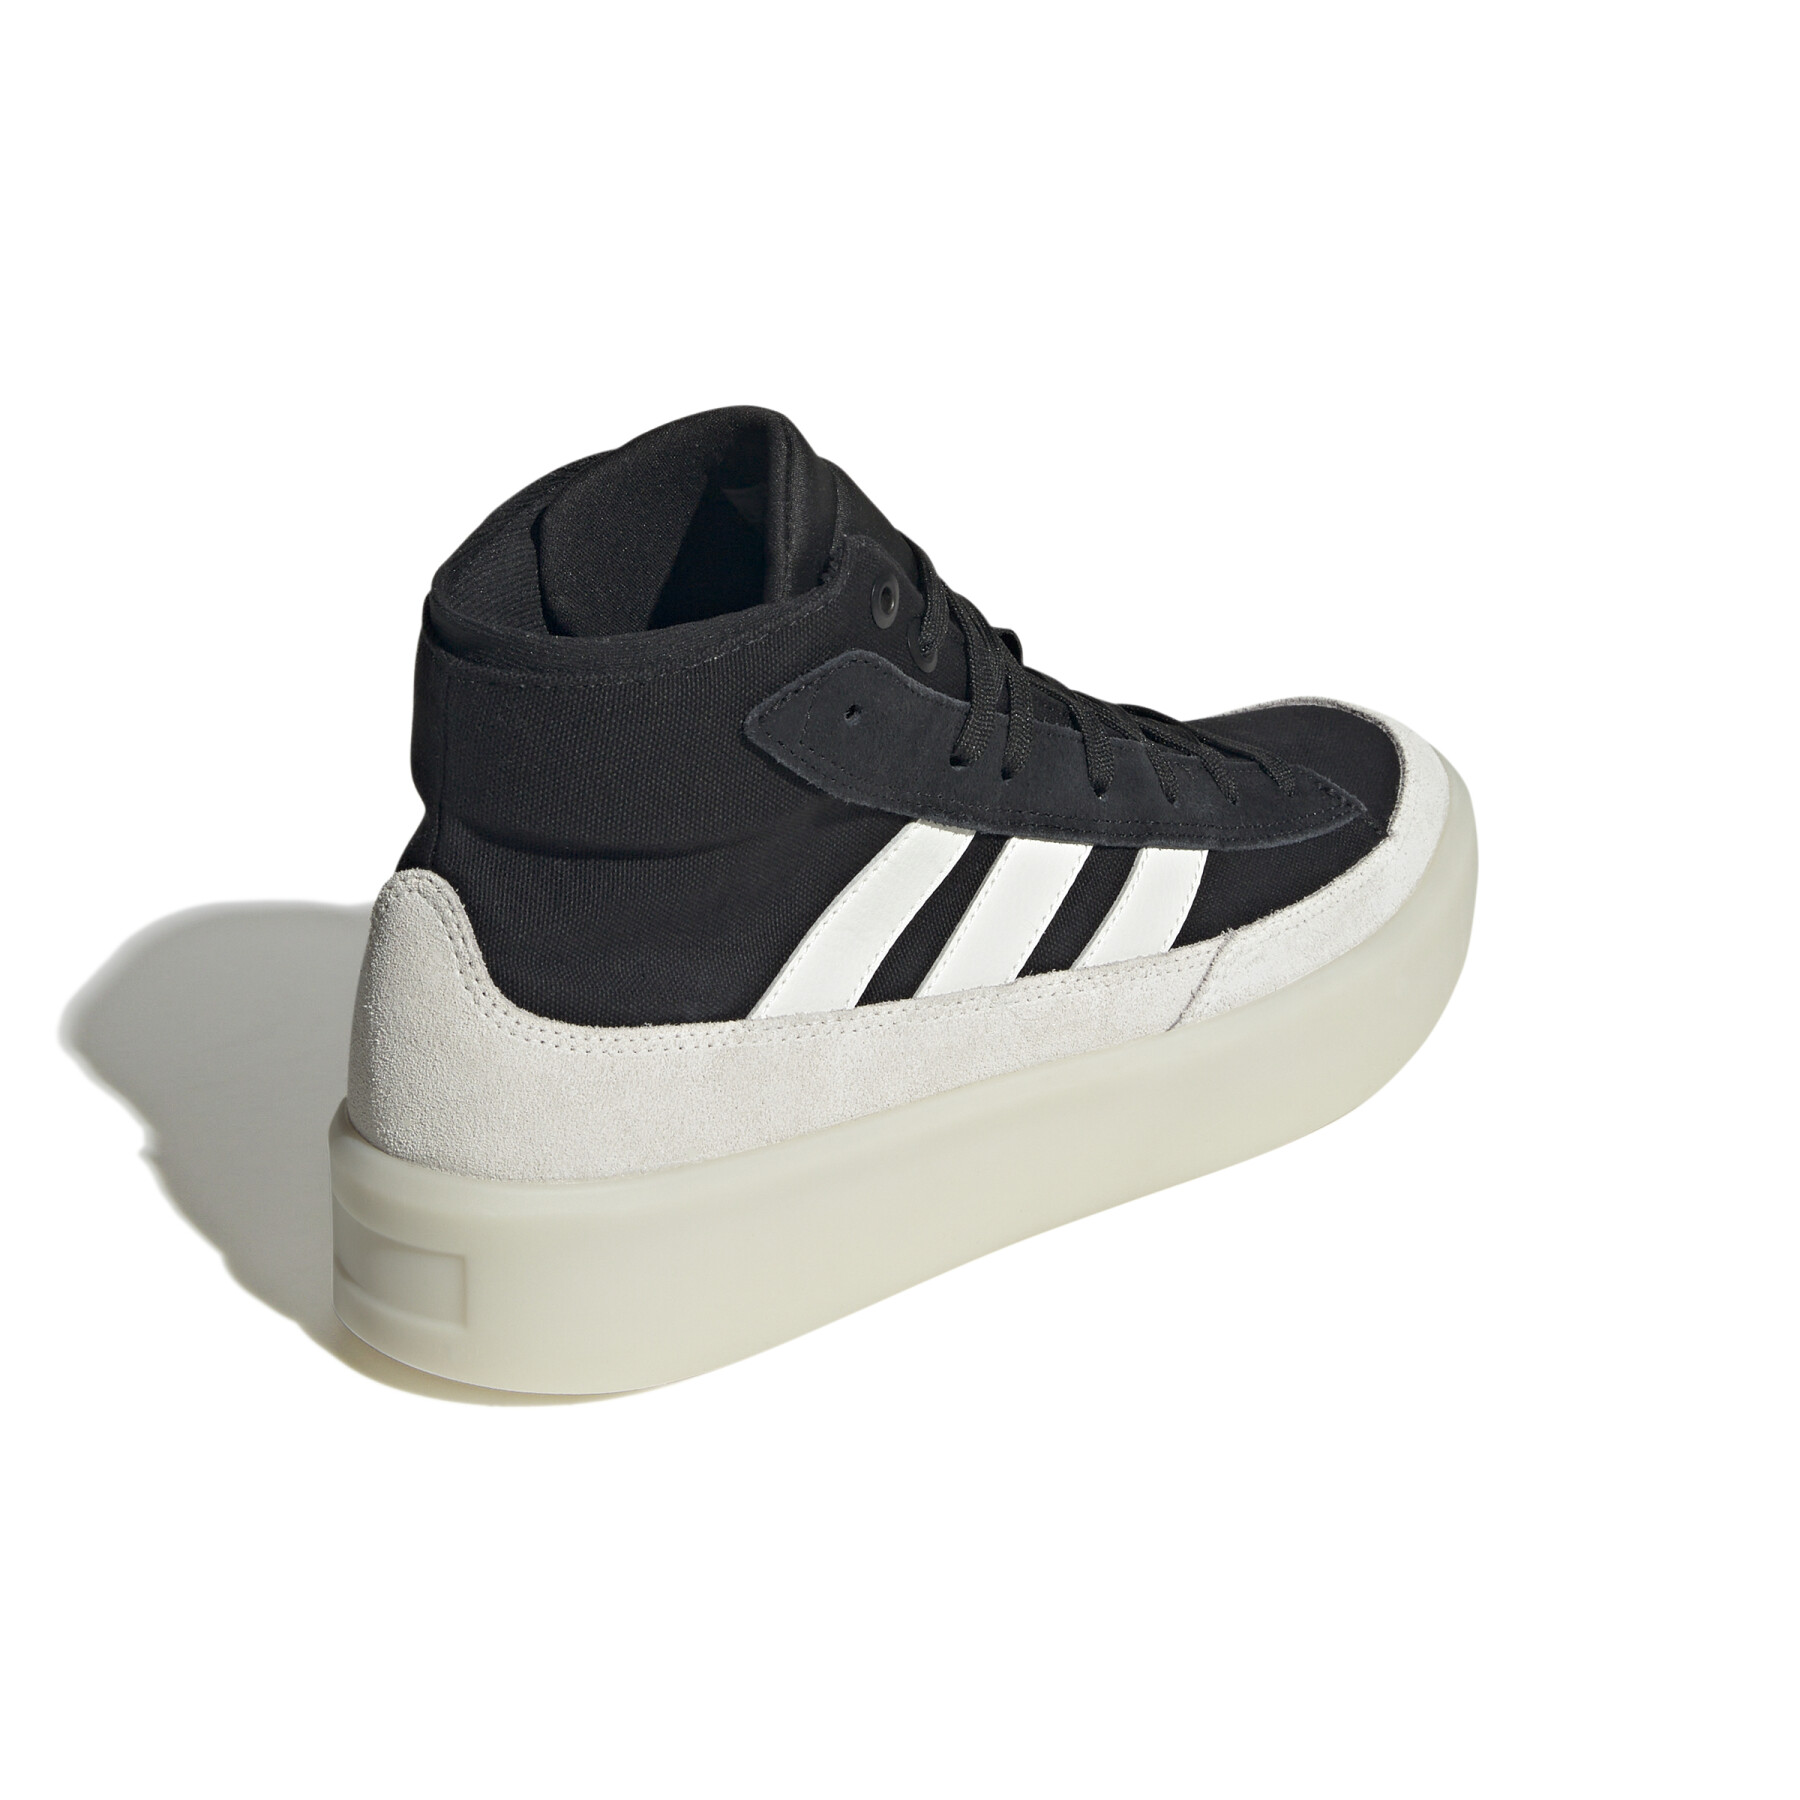 Sneakers adidas Znsored High